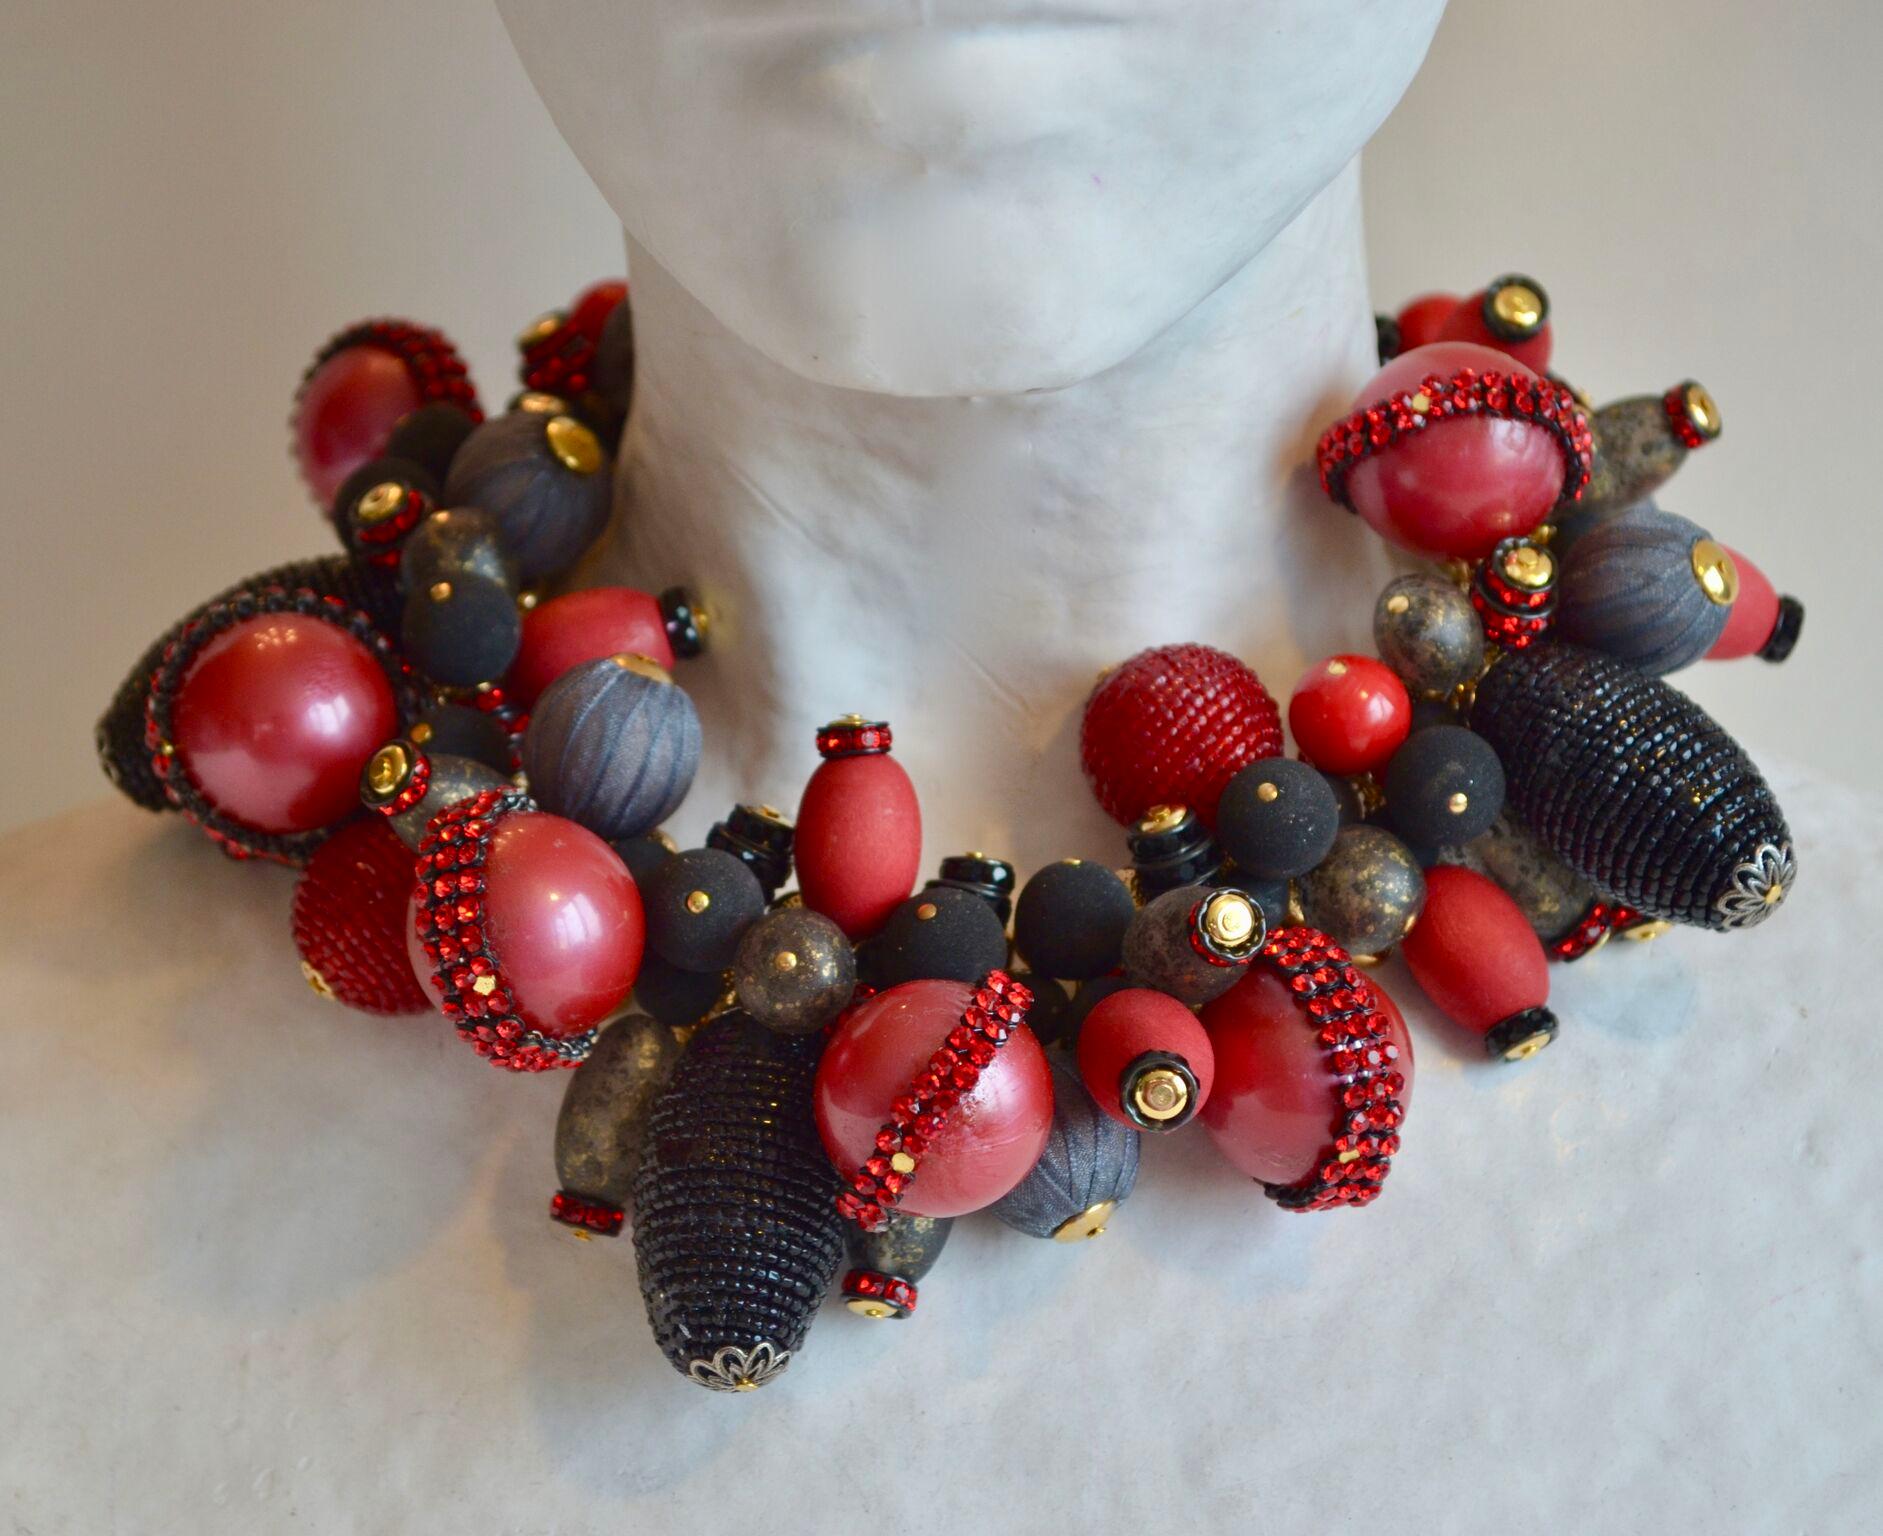 Vintage glass beads in shades of red, grey, and black are strung together on a fabulous gold chain  in this statement piece from design house Francoise Montague. Hand made in Paris. 